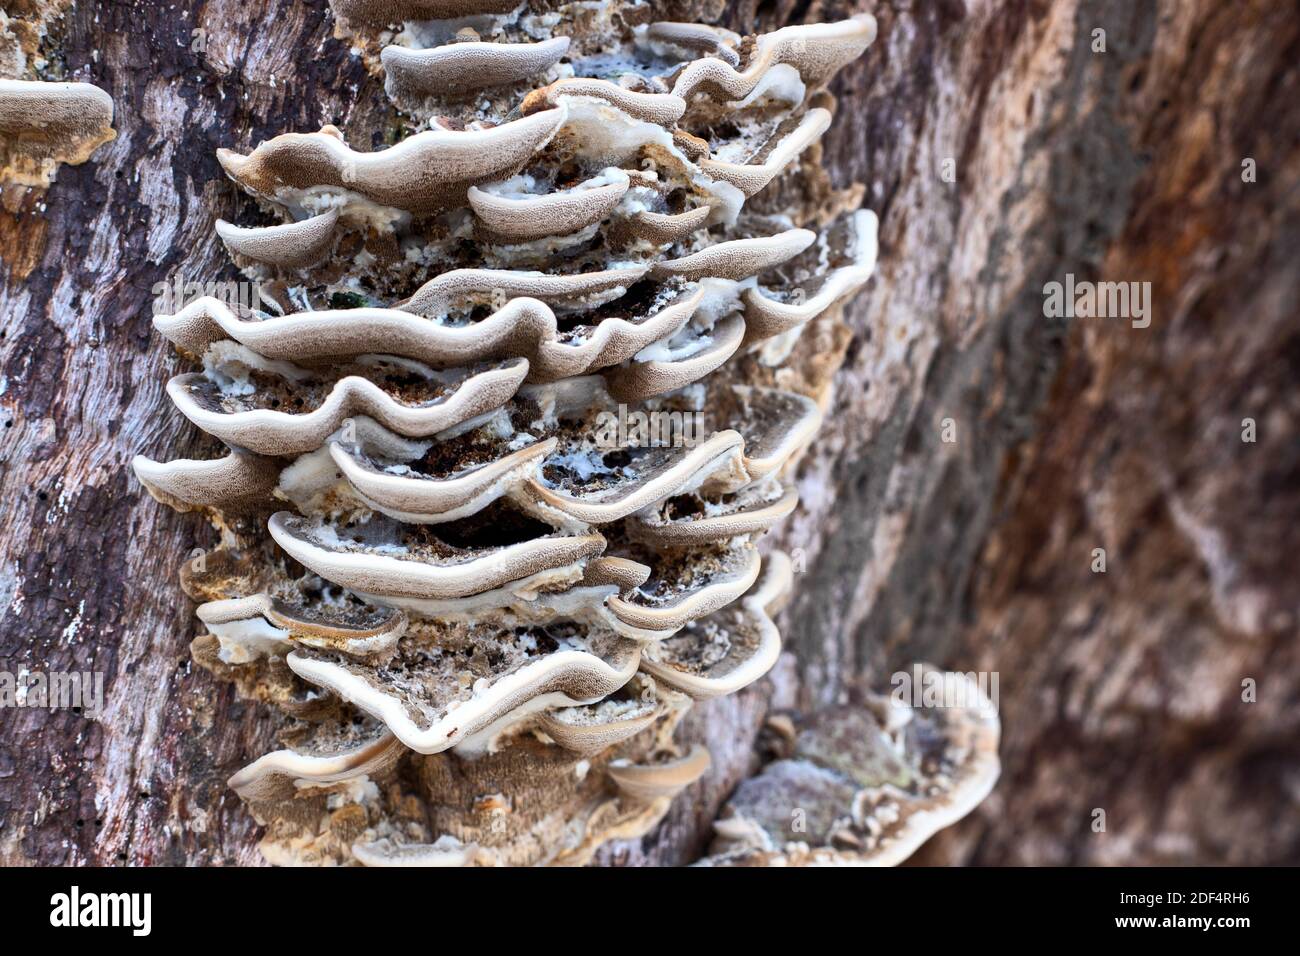 Wooden mushroom on weathered tree trunk closeup photo. Shelf mushroom decay on wooden trunk. Wet autumn forest walk or trekking banner template. Woode Stock Photo